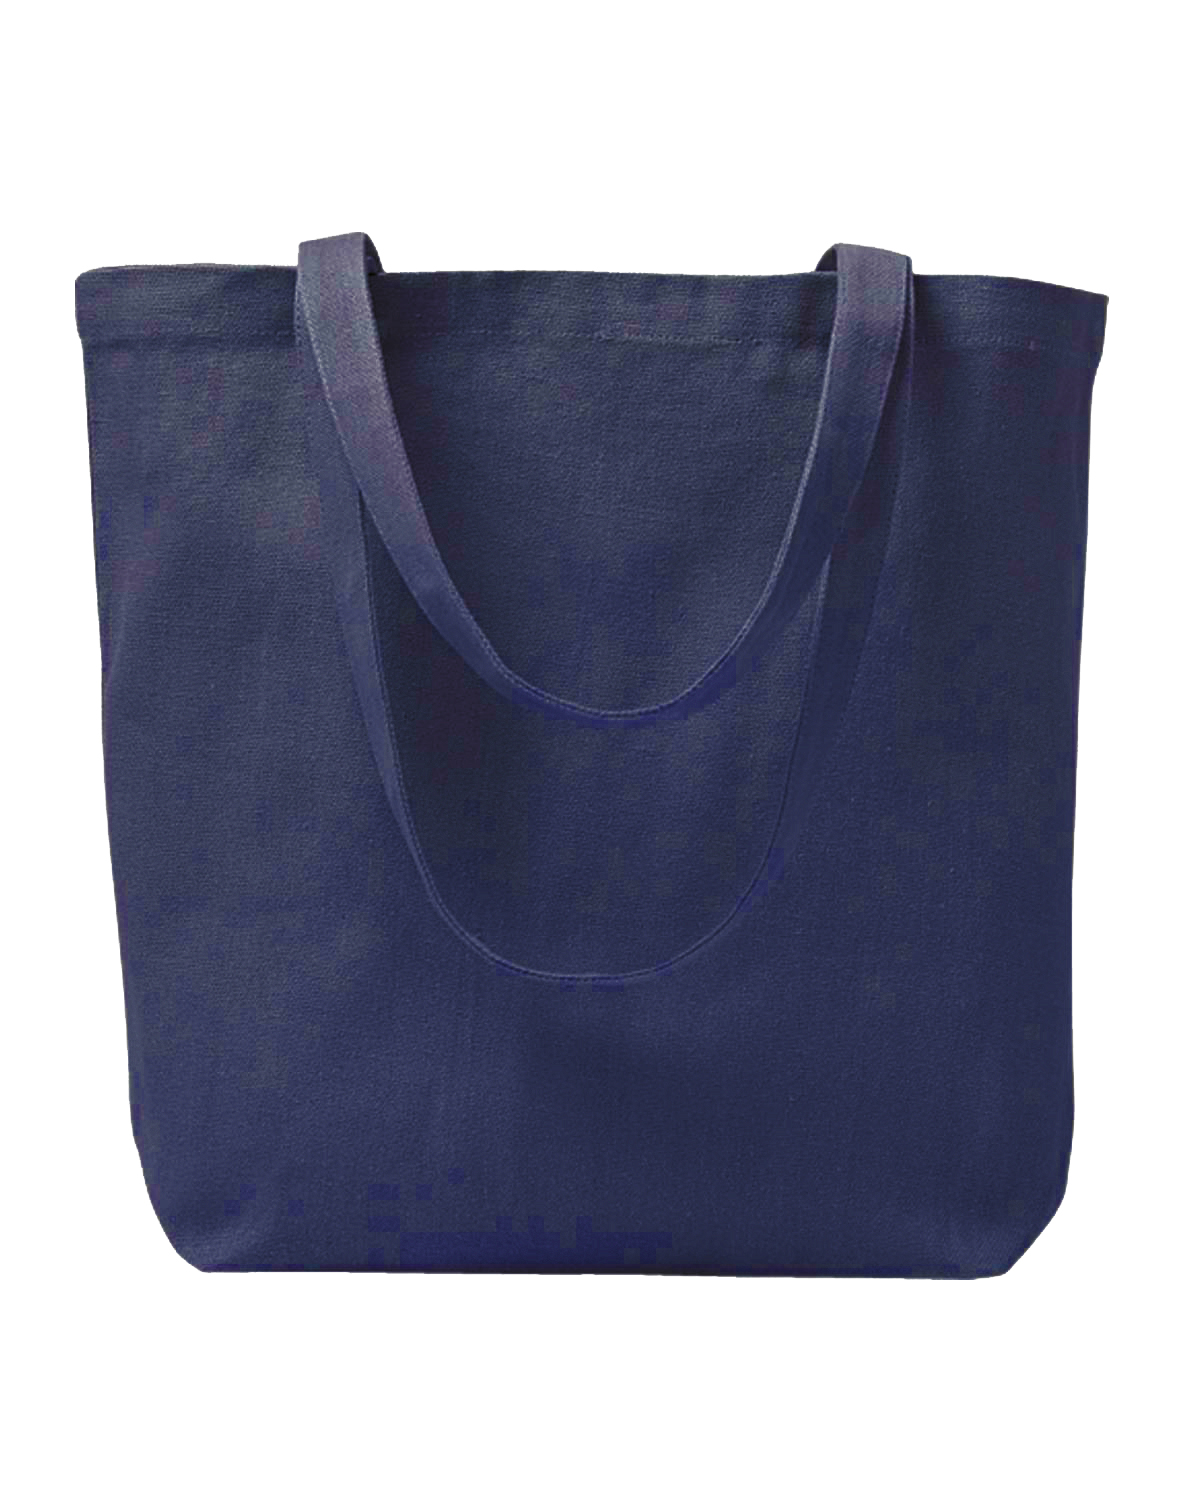 EC8005 econscious 7 oz. Recycled Cotton Everyday Tote